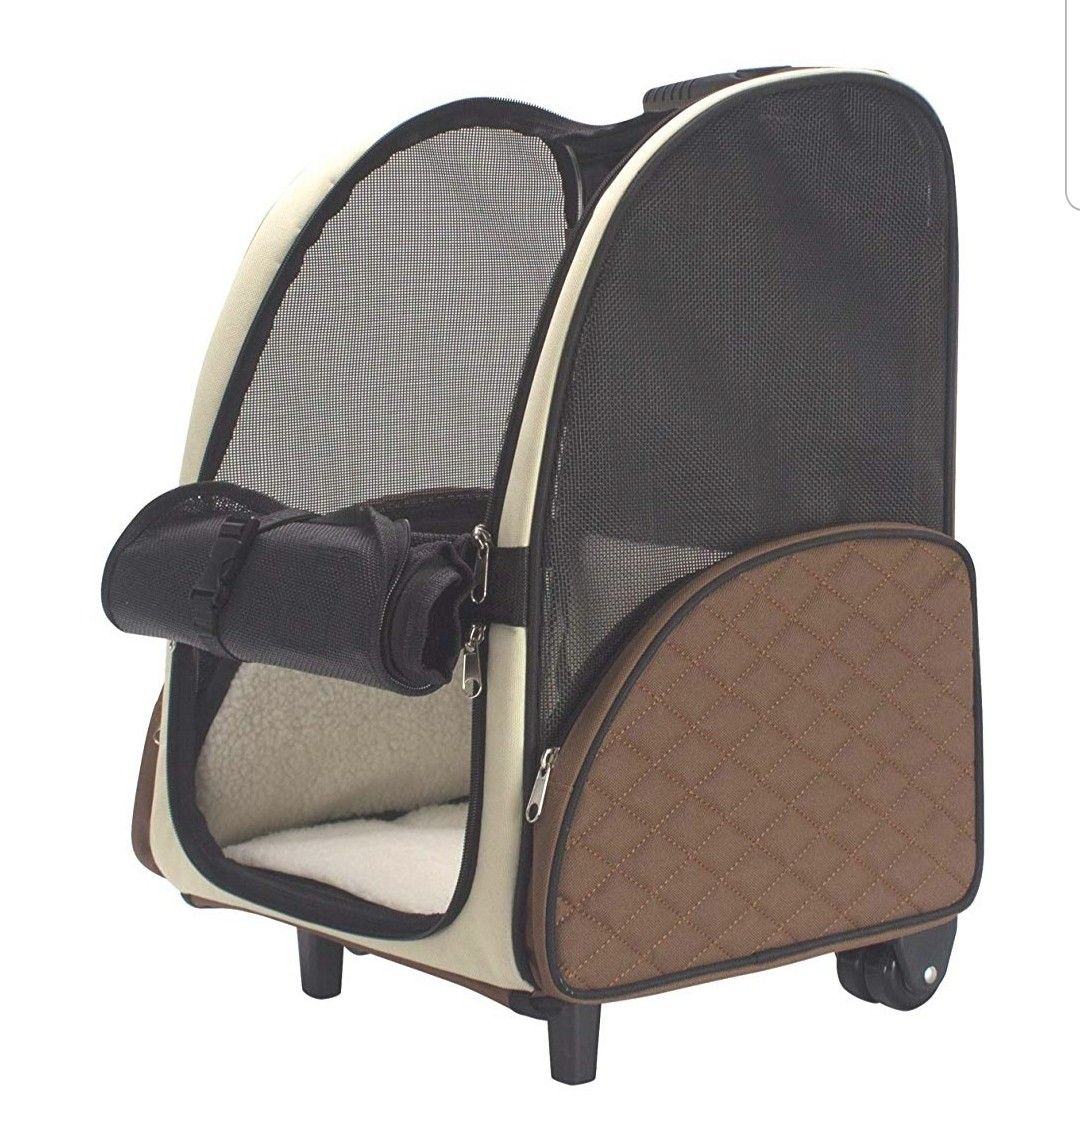 Pet carrier for travel